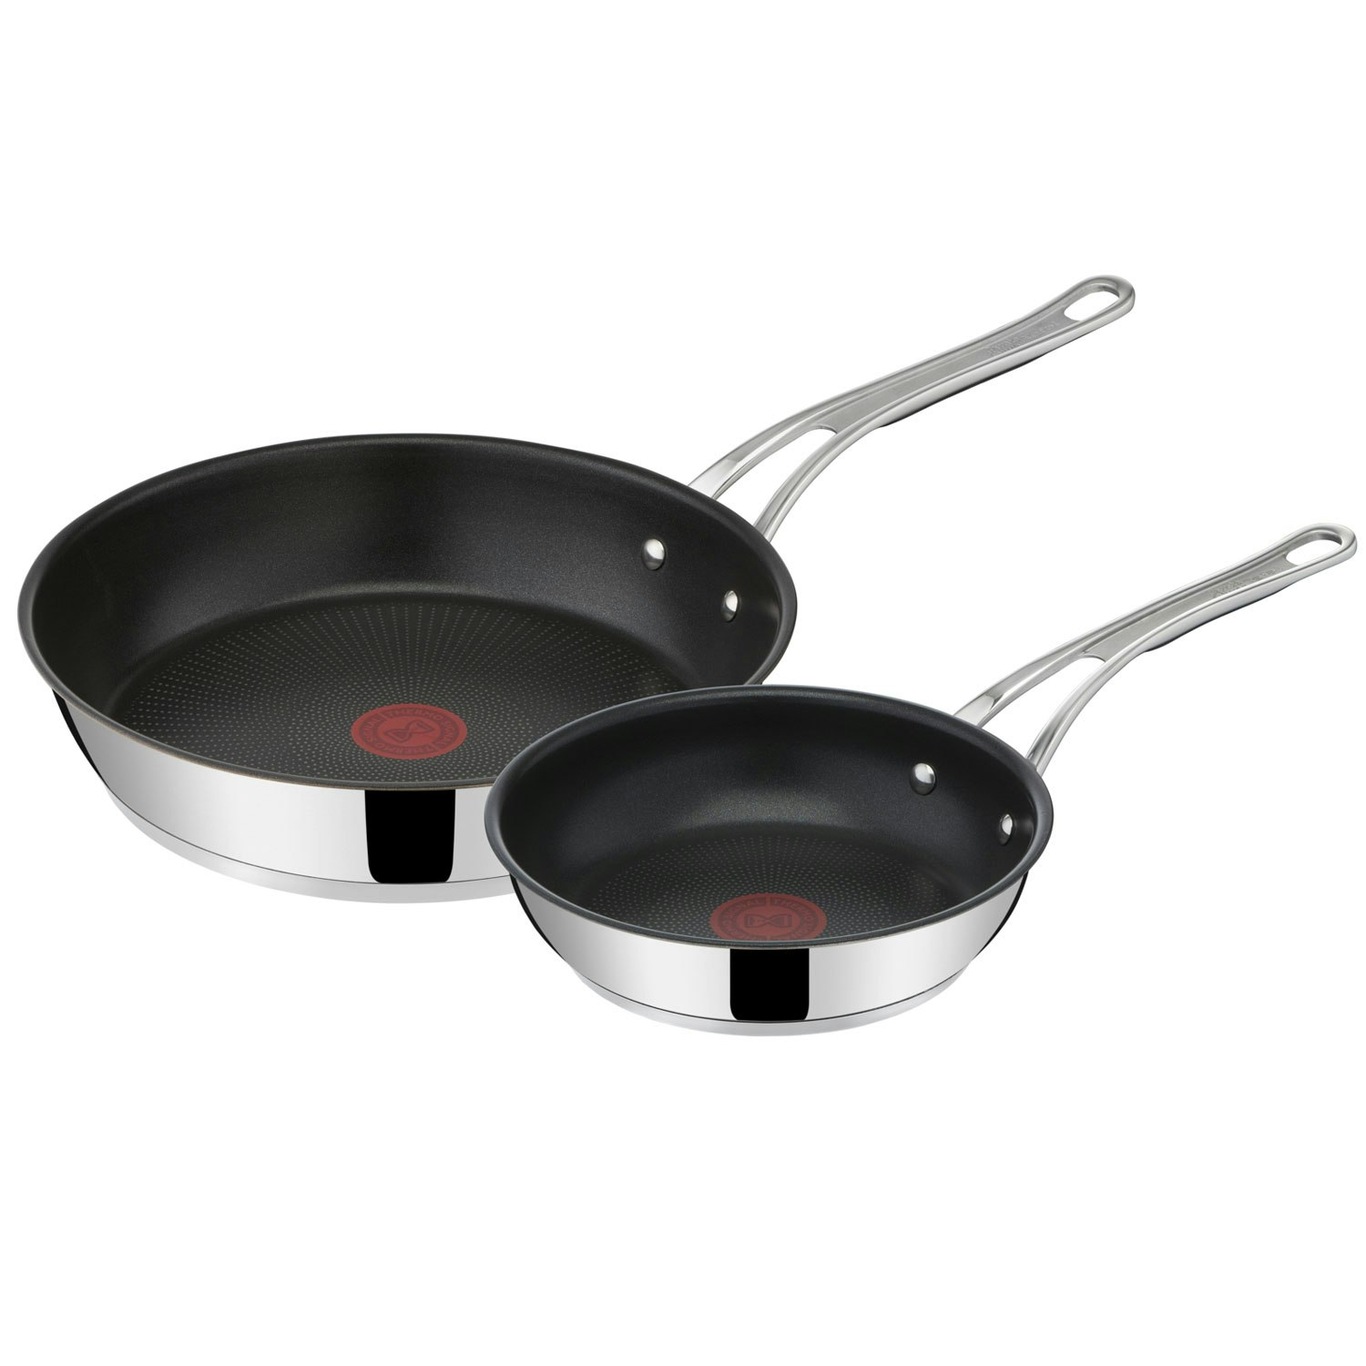 Jamie Oliver by Tefal H801S514 Stainless Steel 5 Piece Cookware Set - Red